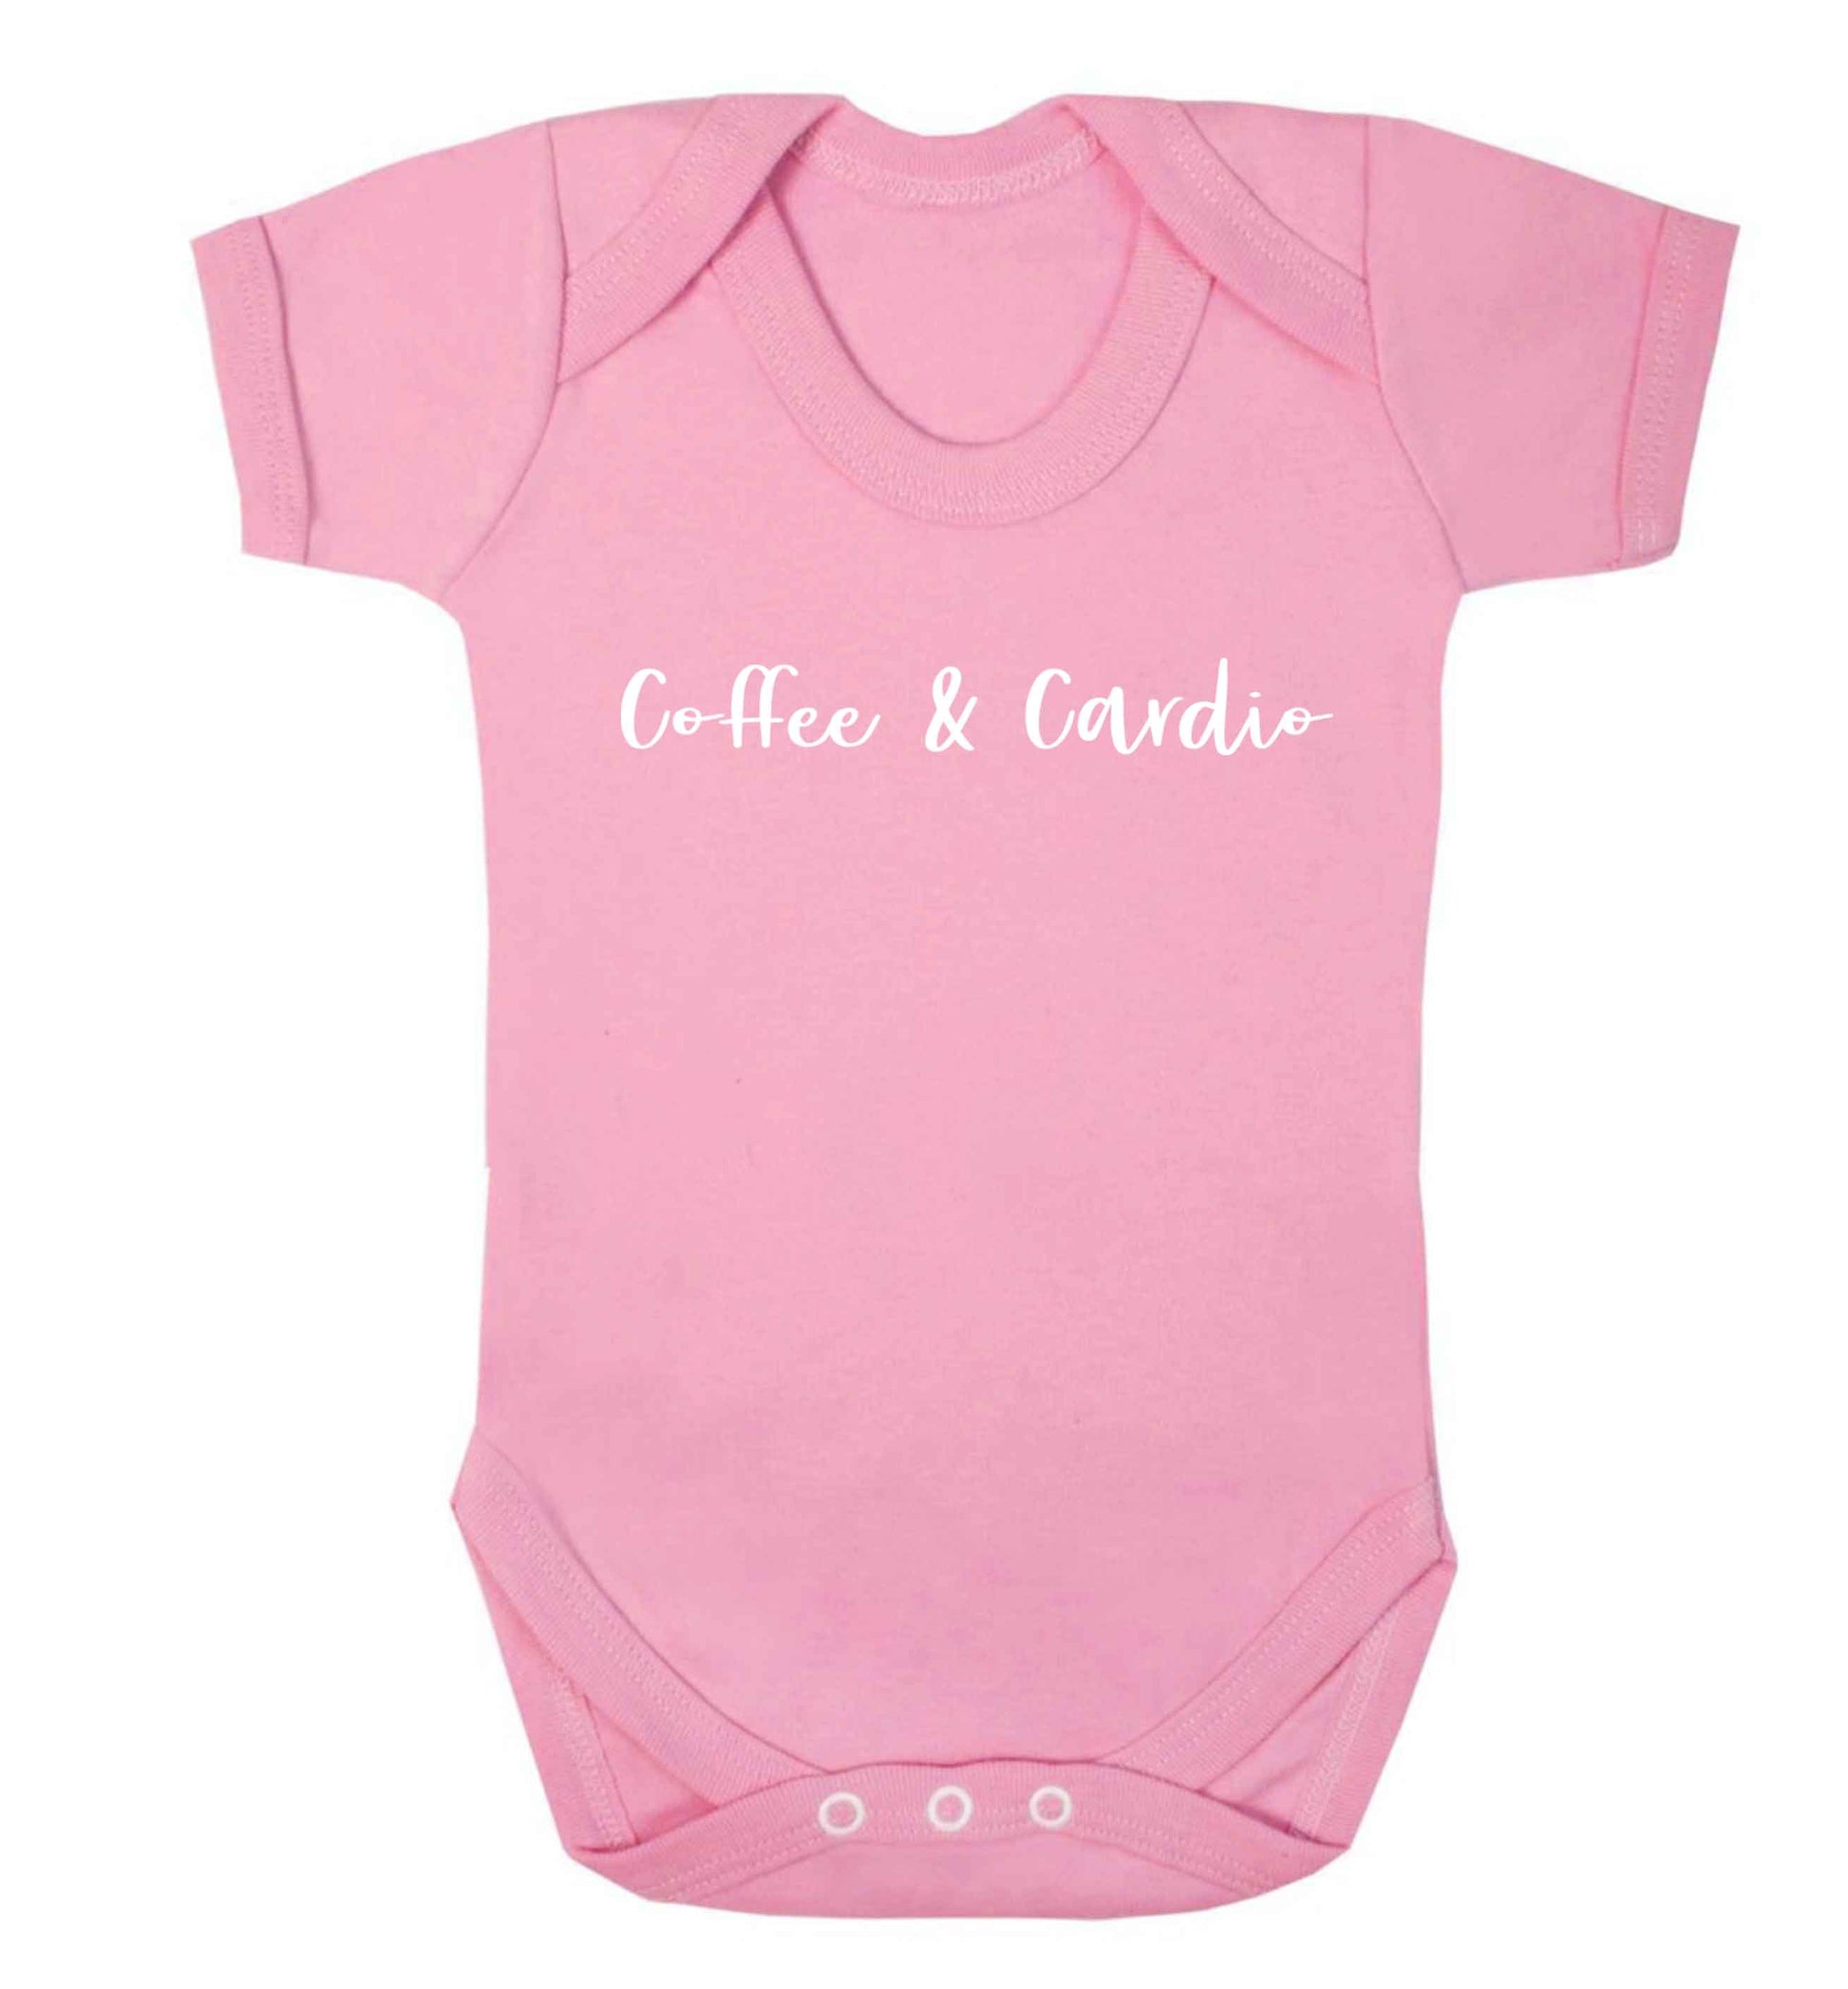 Coffee and cardio Baby Vest pale pink 18-24 months